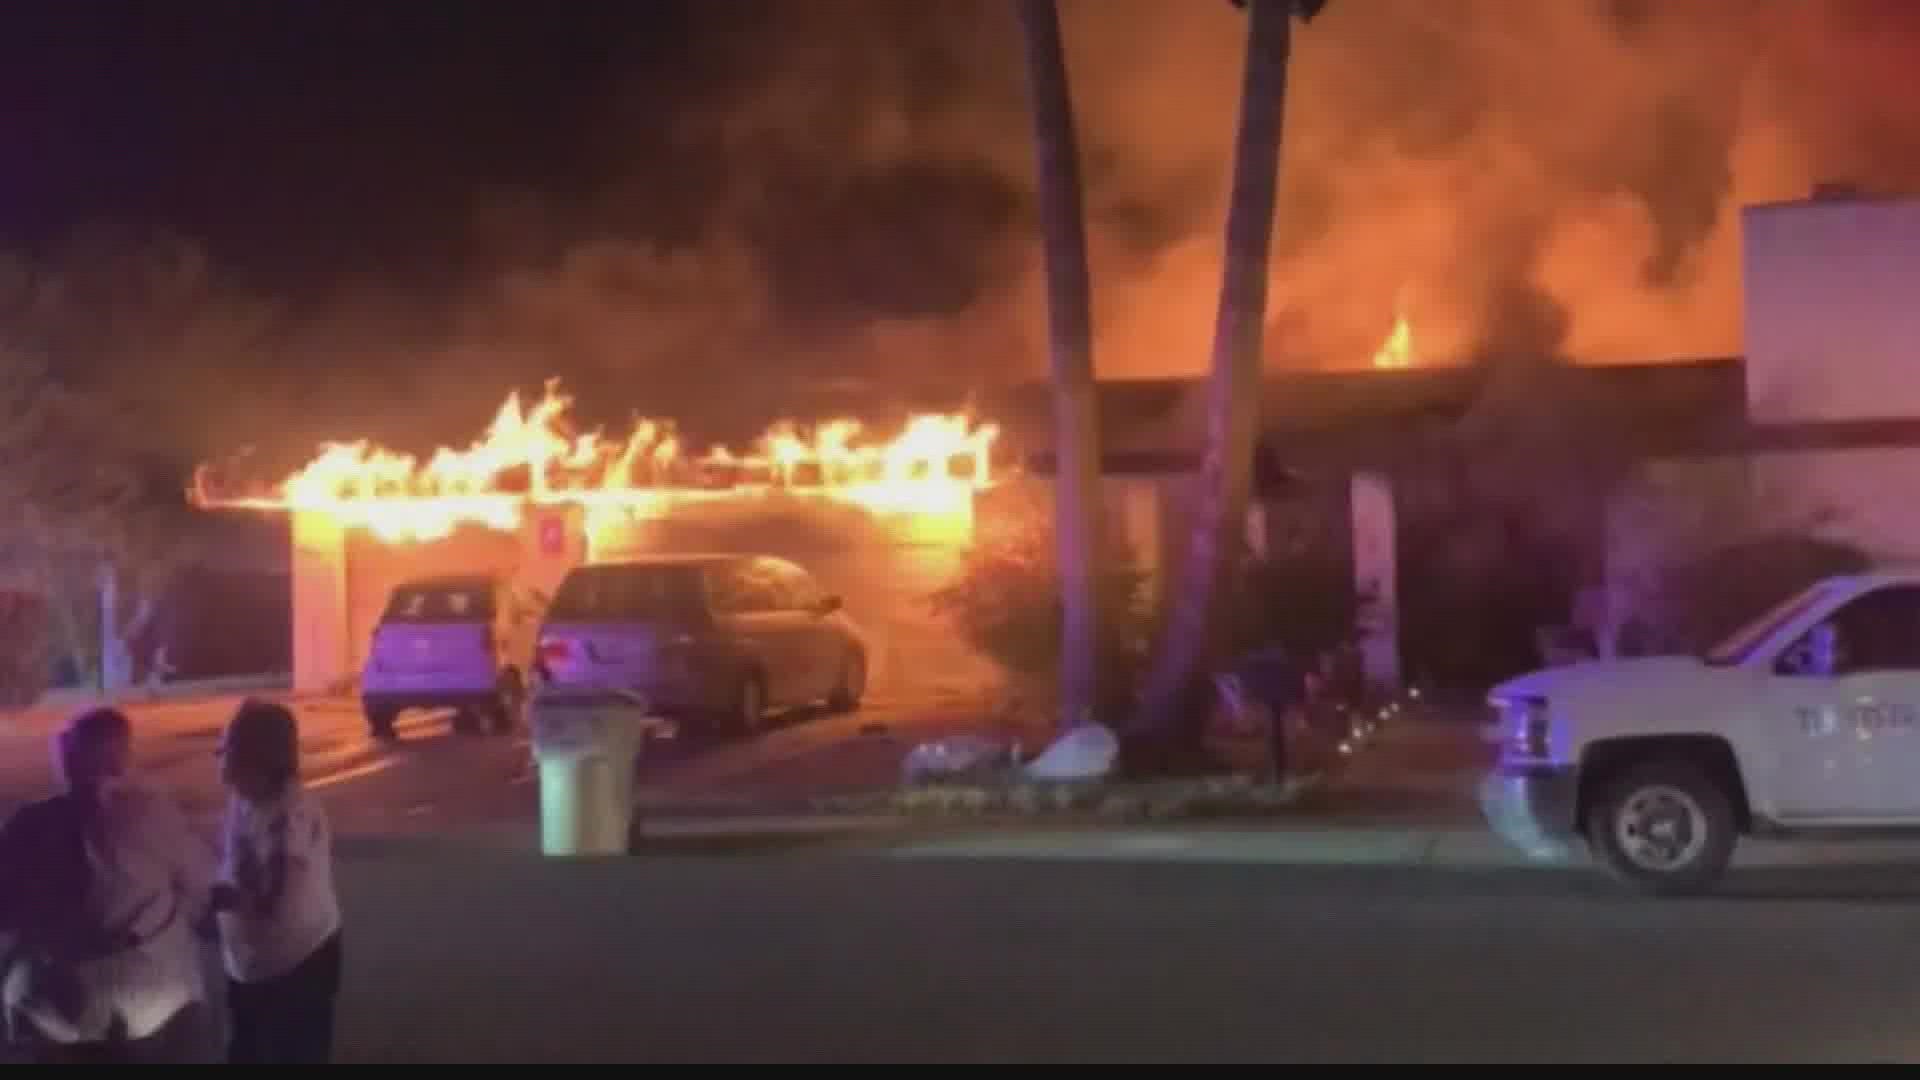 Three homes recently caught fire over the weekend in Glendale and officials said fireworks are to blame. Here are the details.